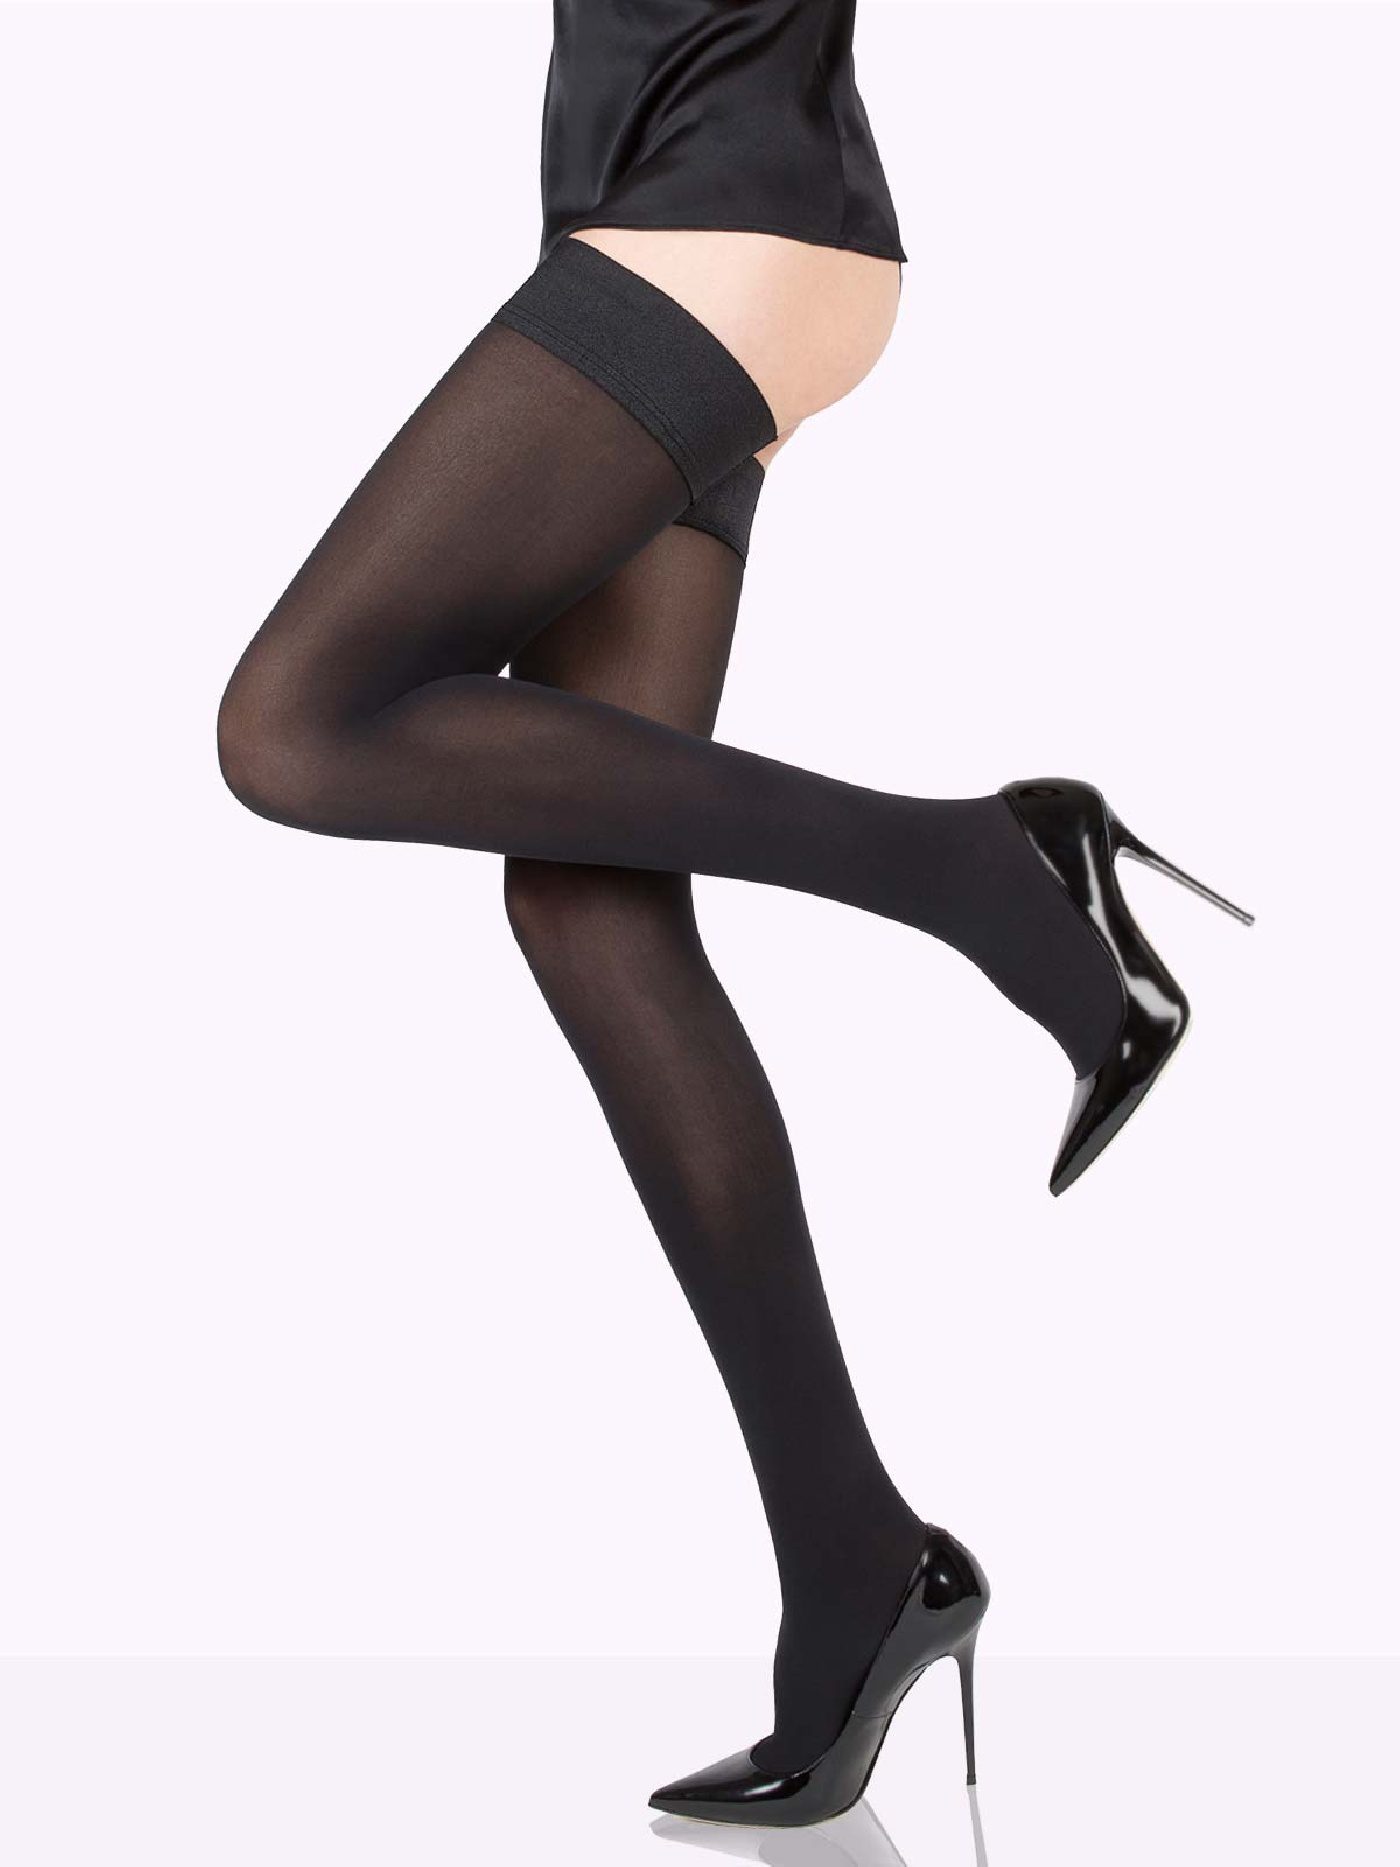 Incorporating Stockings Into Your Business Wardrobe – VienneMilano